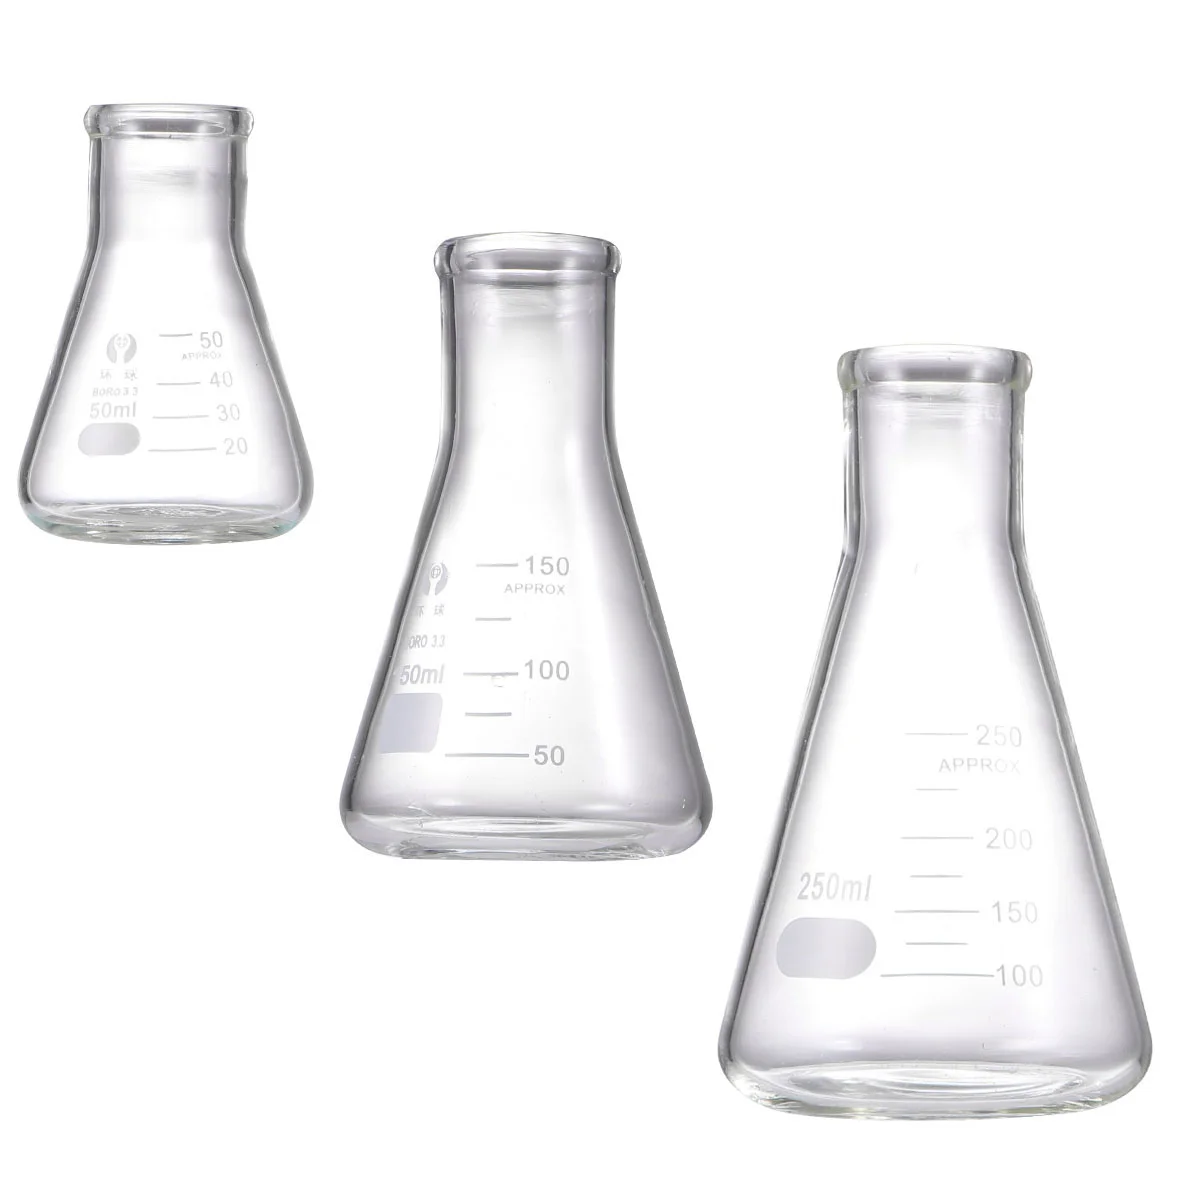 

3pcs Thickened Glass Flask Conical Flask School Supply Experiment Accessory for Laboratory Students Chemistry Experiment (50ml,